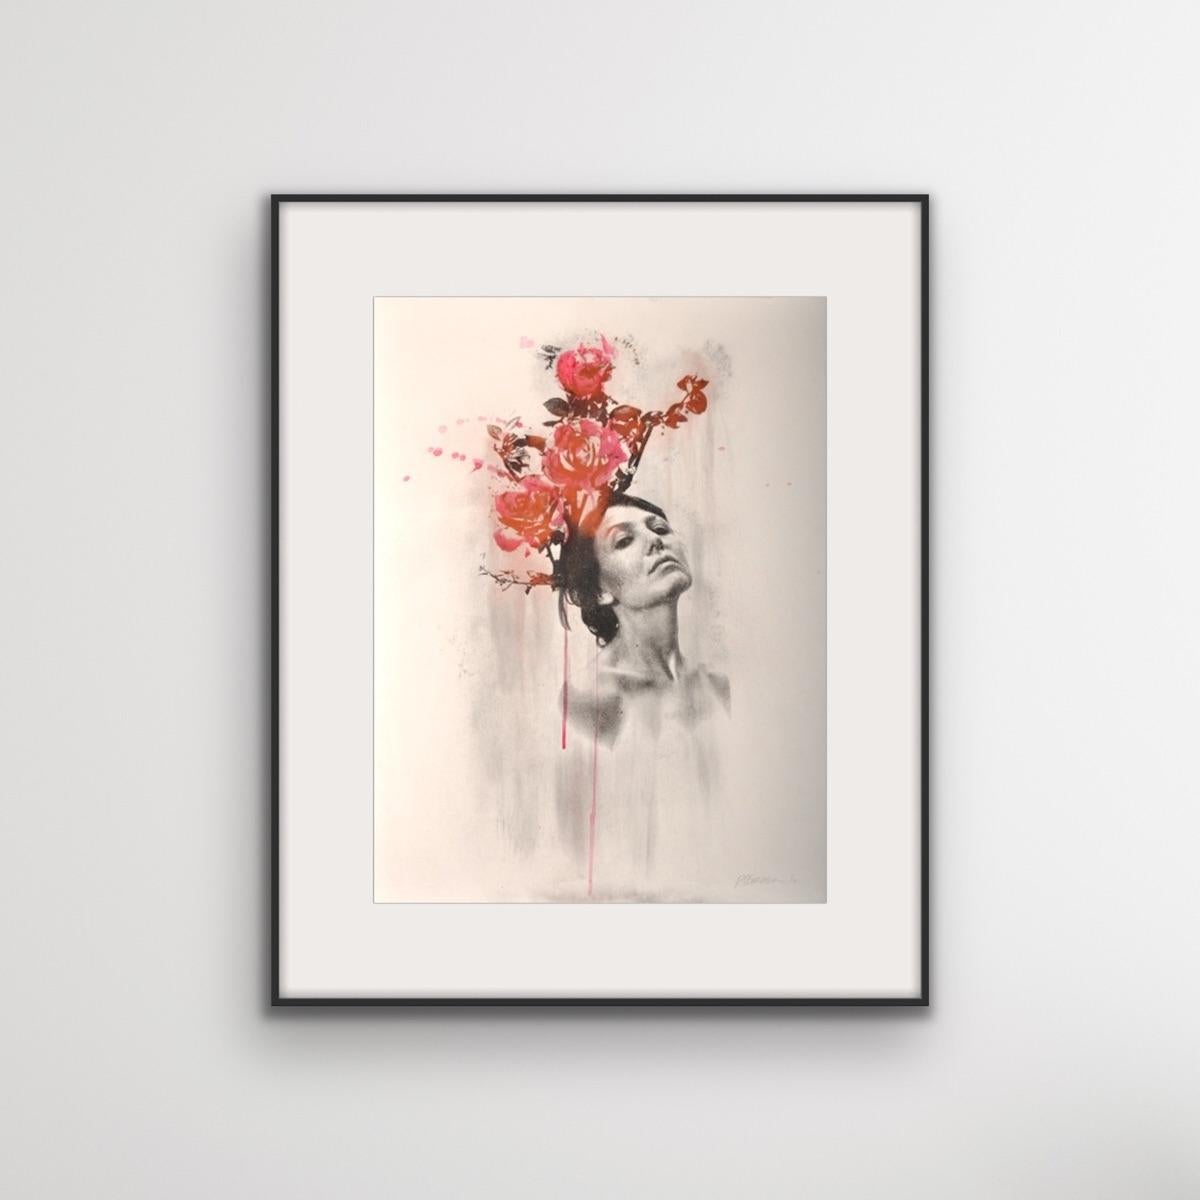 Blood Roses by Rosie Emerson
Hand signed by the artist 
Limited Edition Silkscreen Print
Edition of 10 +2 AP’s
Sheet Size: H 75cm x W 55cm x D 0.1cm
Sold Unframed
Please note that in situ images are purely an indication of how a piece may